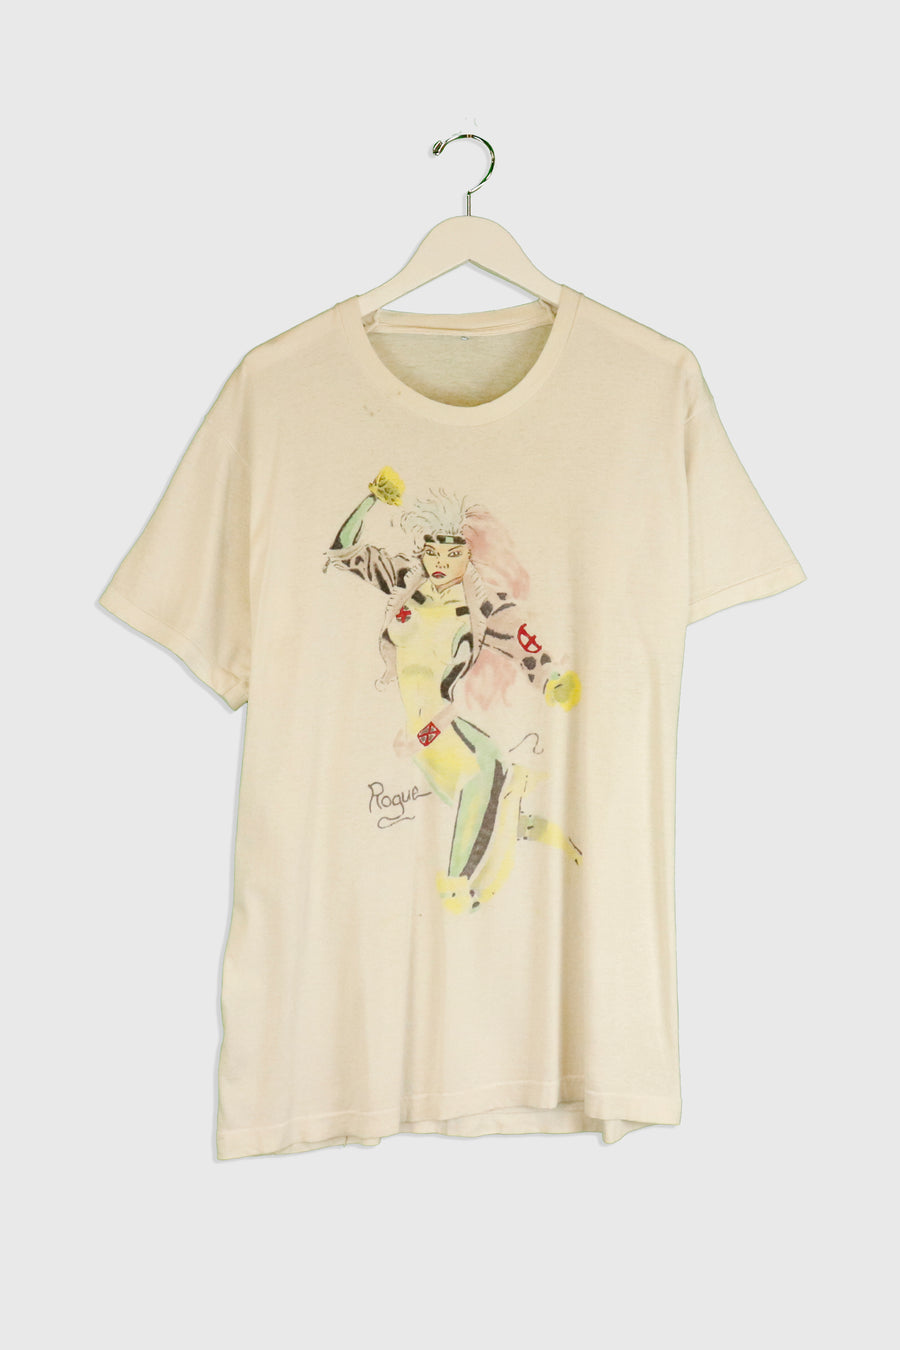 Vintage Marvel Rogue Hand Drawn Faded T Shirt